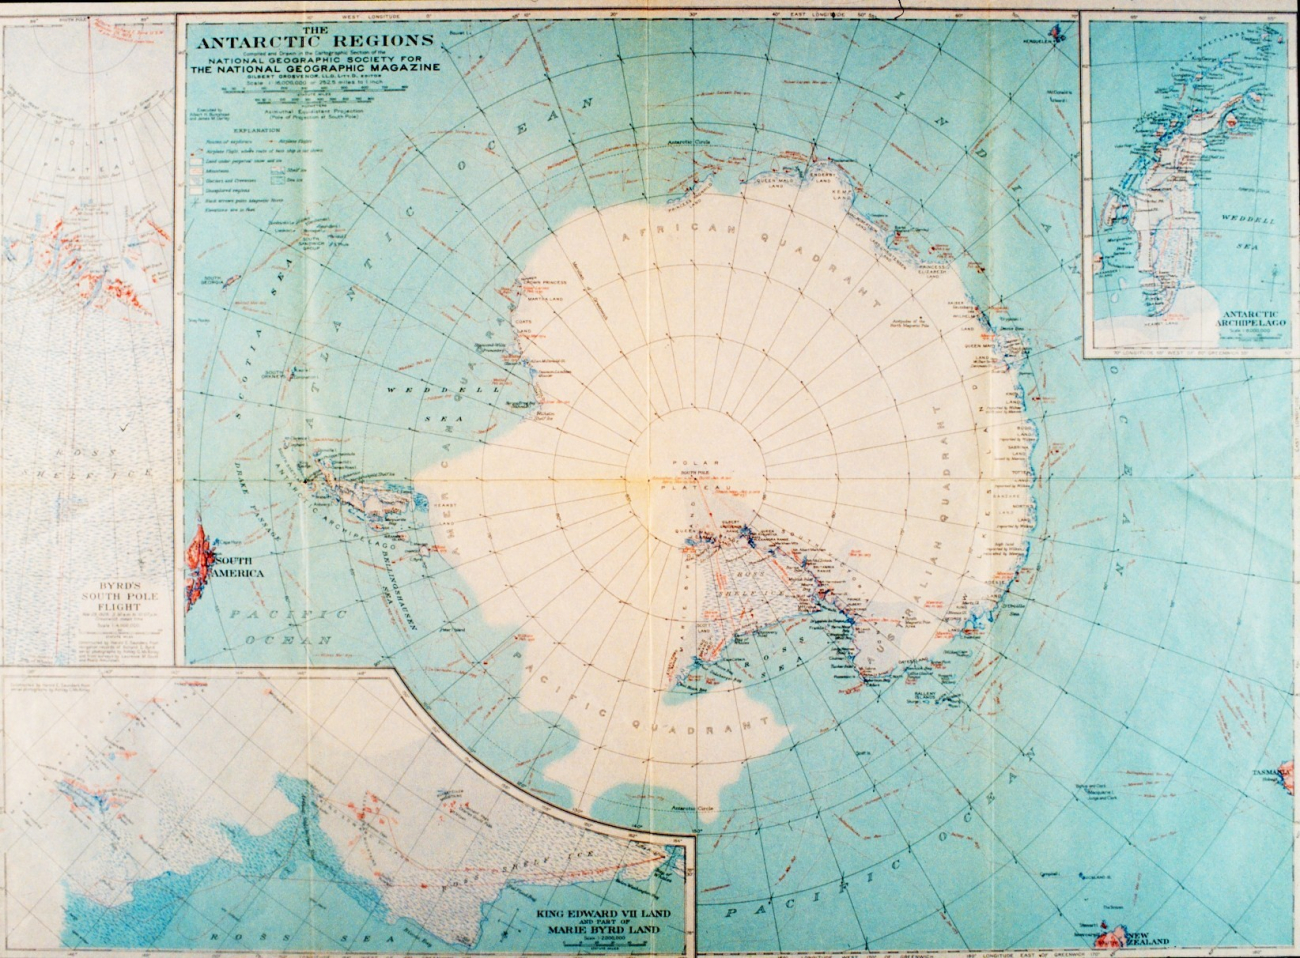 Map of Antarctica - early Twentieth Century map from the National GeographicSociety